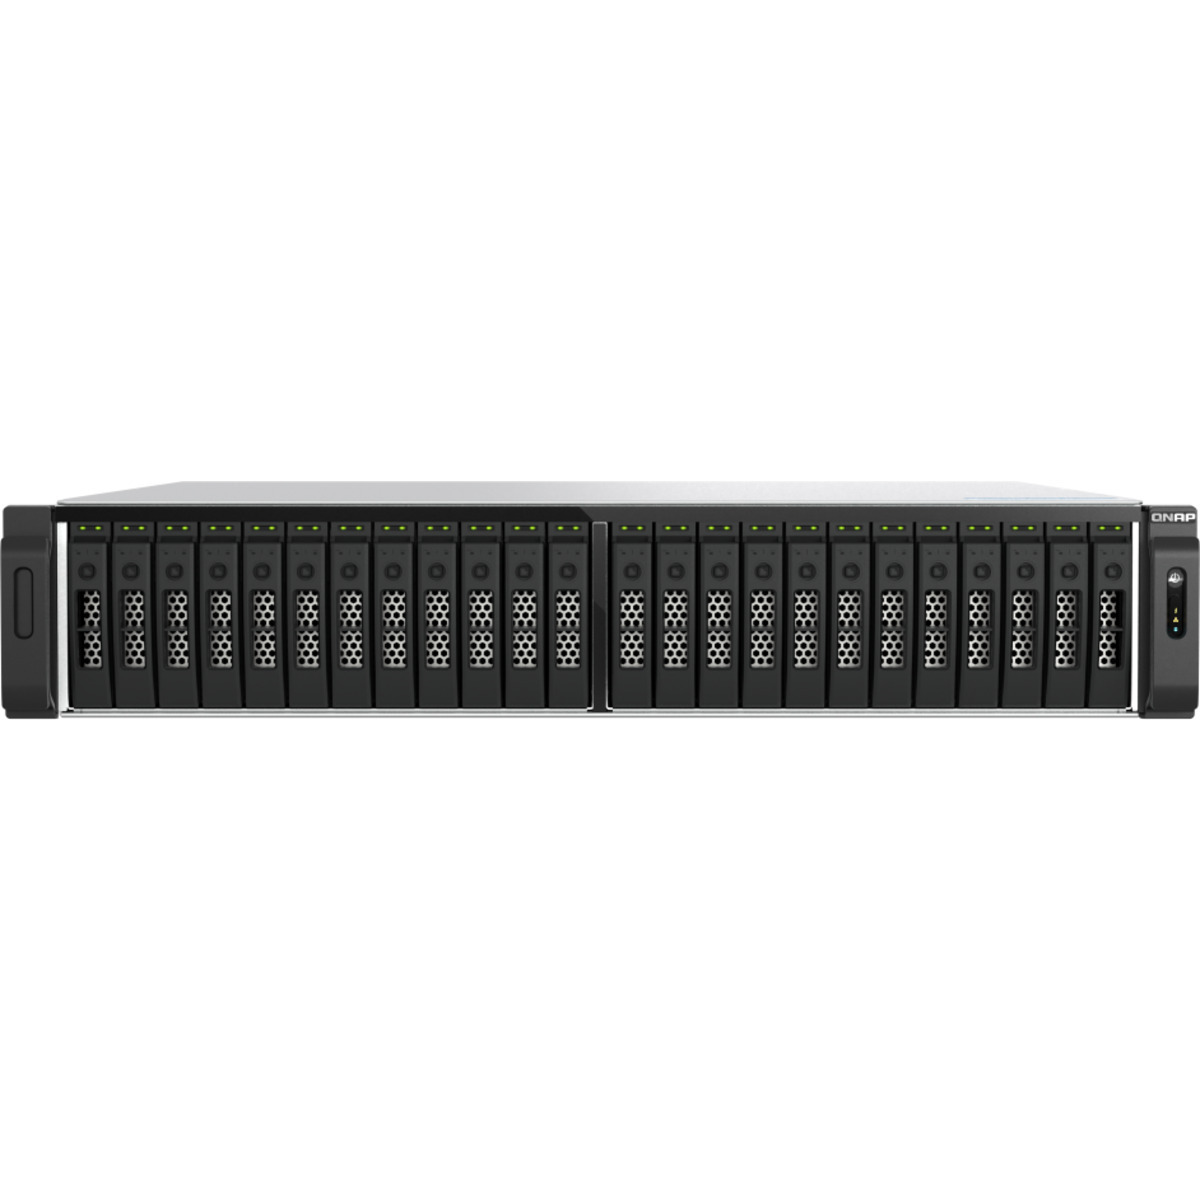 QNAP TS-h3077AFU Ryzen 5 All-Flash ZFS 13.5tb 30-Bay RackMount Large Business / Enterprise NAS - Network Attached Storage Device 27x500gb Crucial MX500 CT500MX500SSD1 2.5 560/510MB/s SATA 6Gb/s SSD CONSUMER Class Drives Installed - Burn-In Tested TS-h3077AFU Ryzen 5 All-Flash ZFS